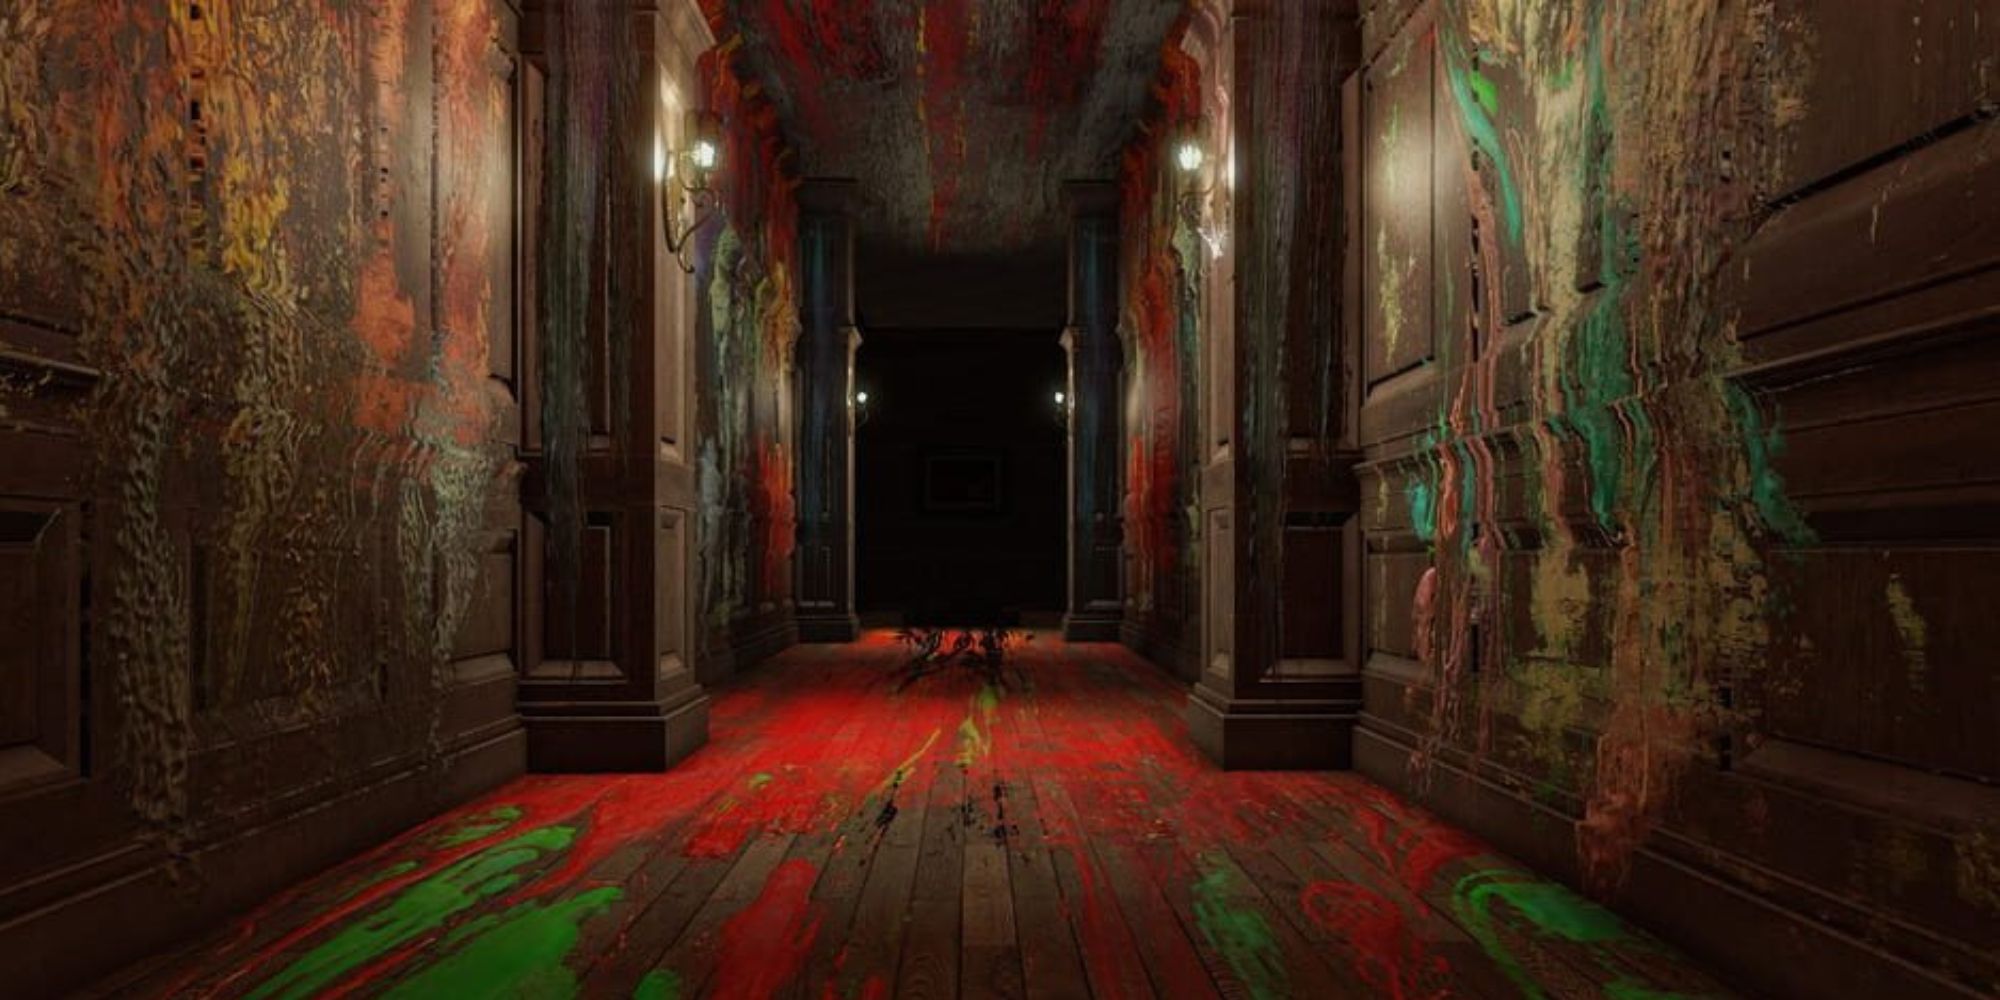 A wooden hallway stretches down into a dark room, with different colors of paint splashed all across the floor and walls